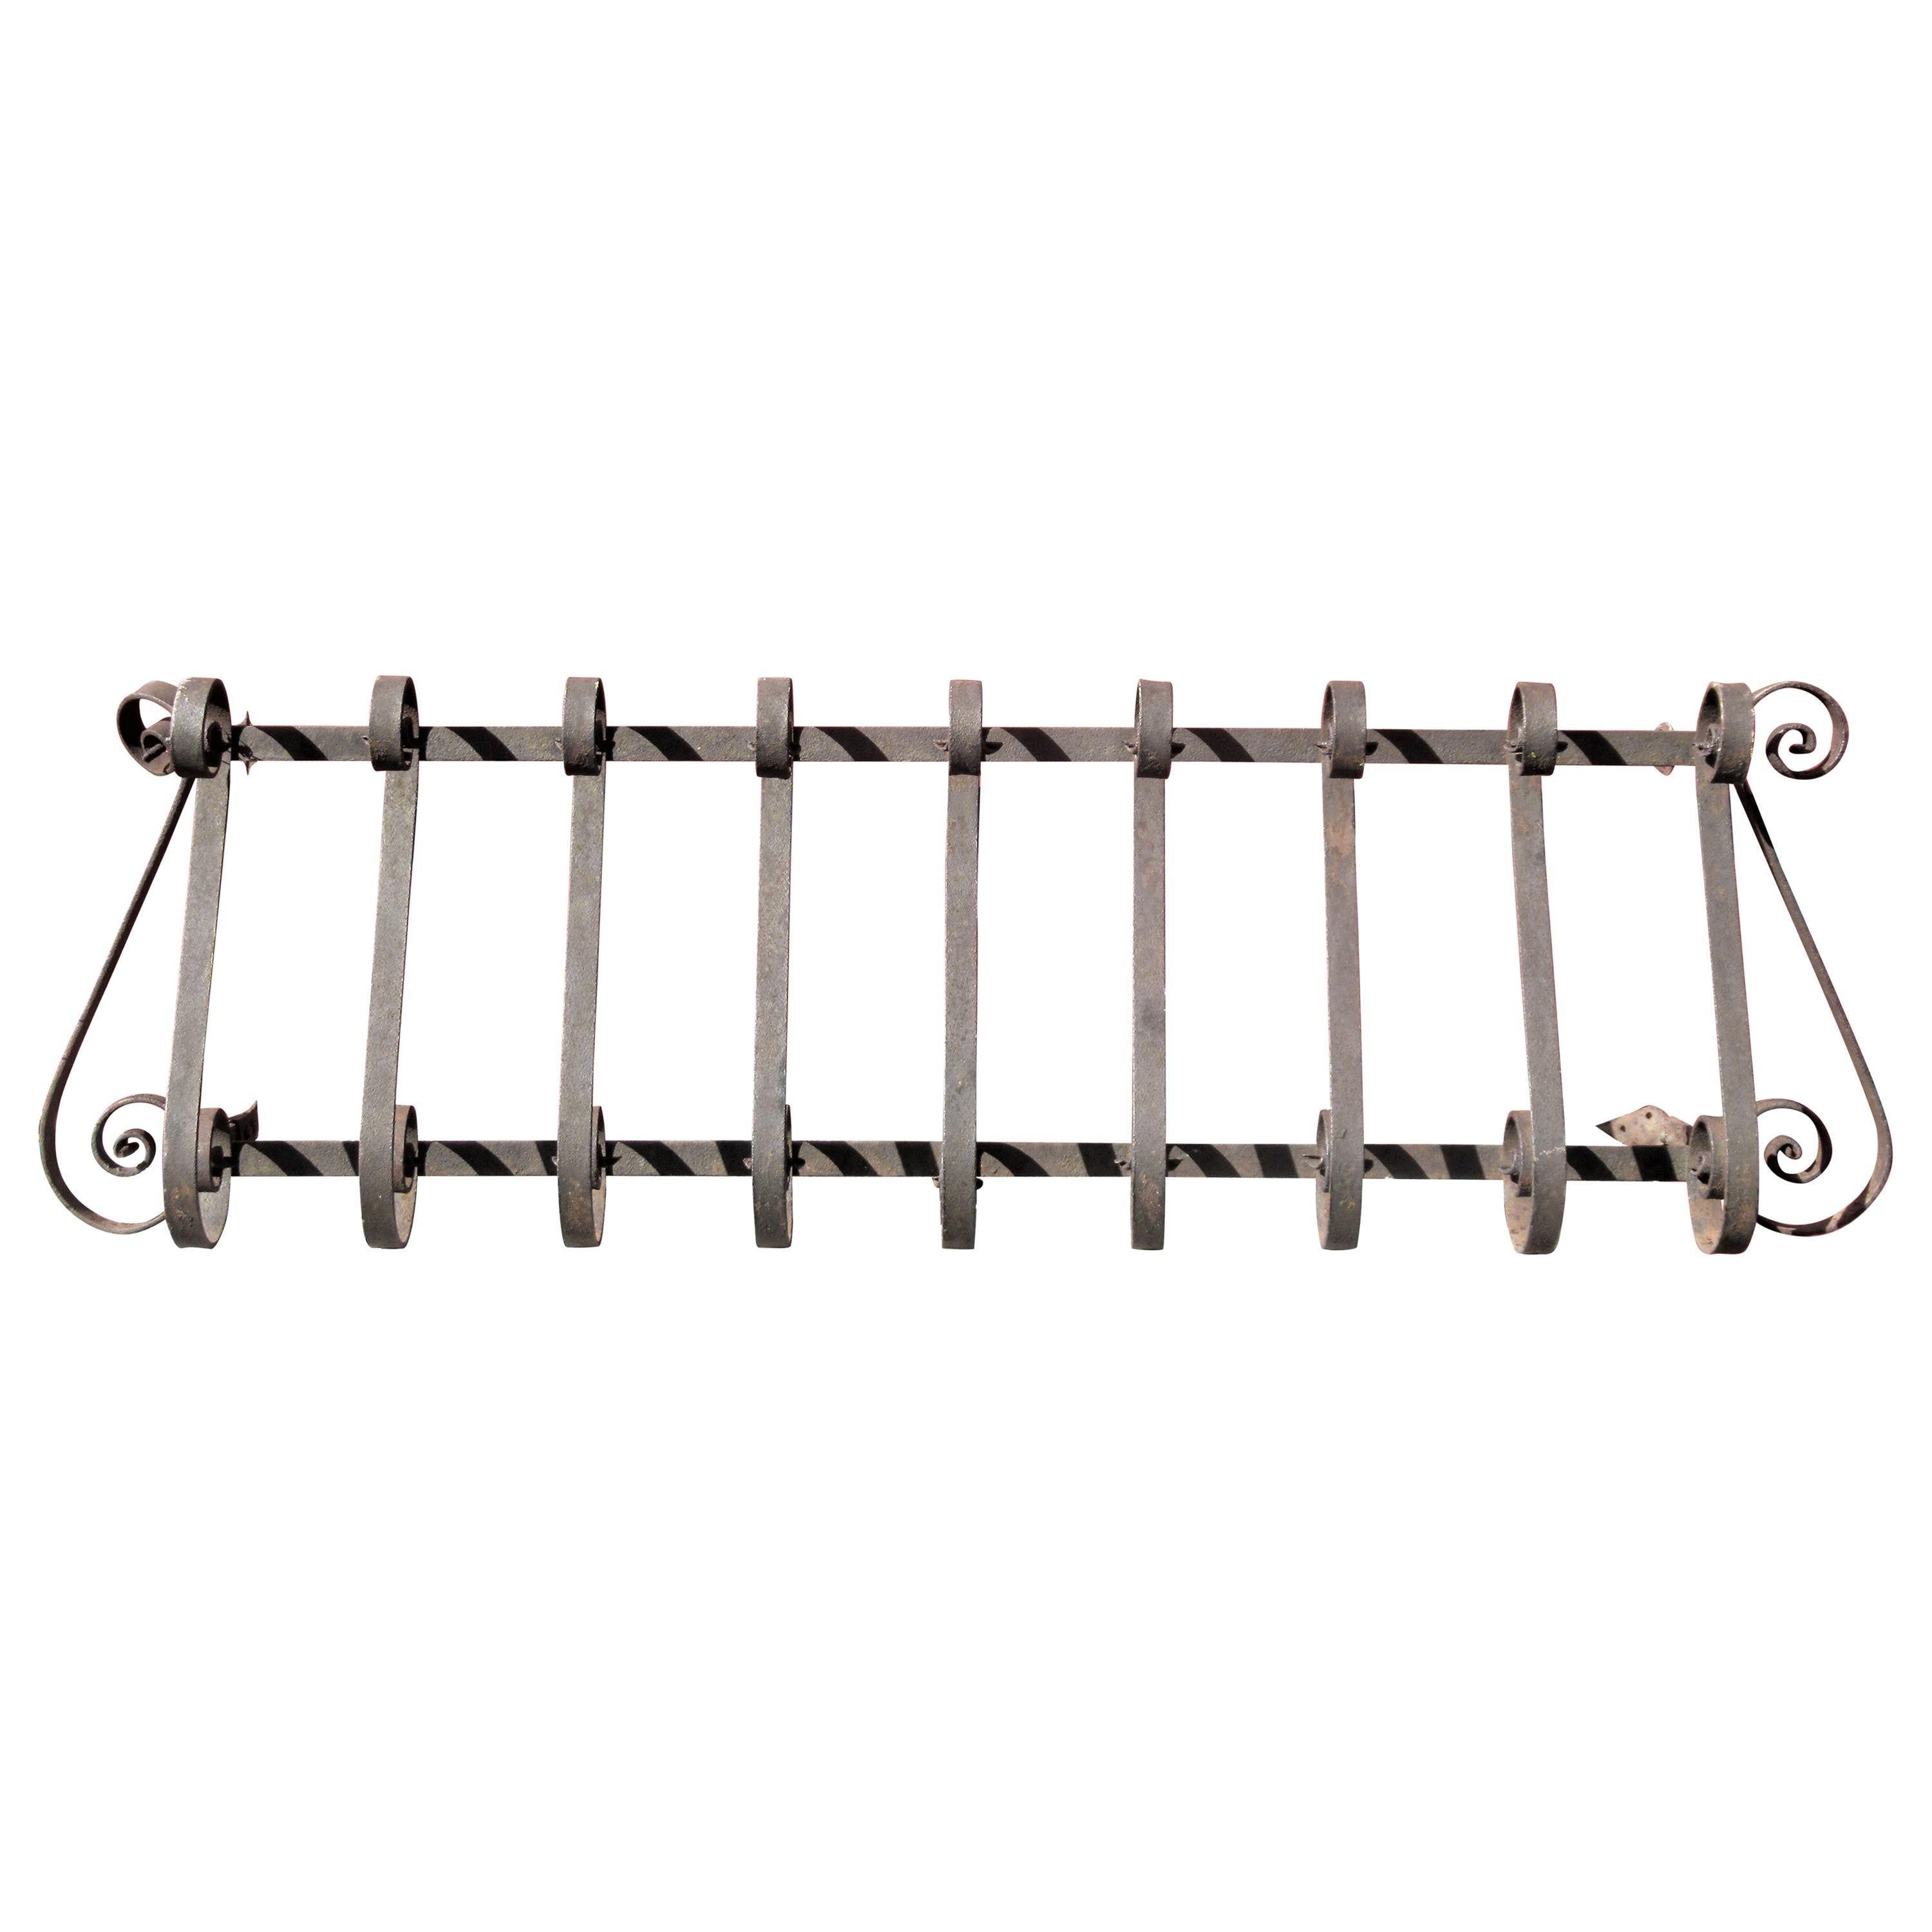 Antique Architectural Hand Wrought Iron Window Box Railing